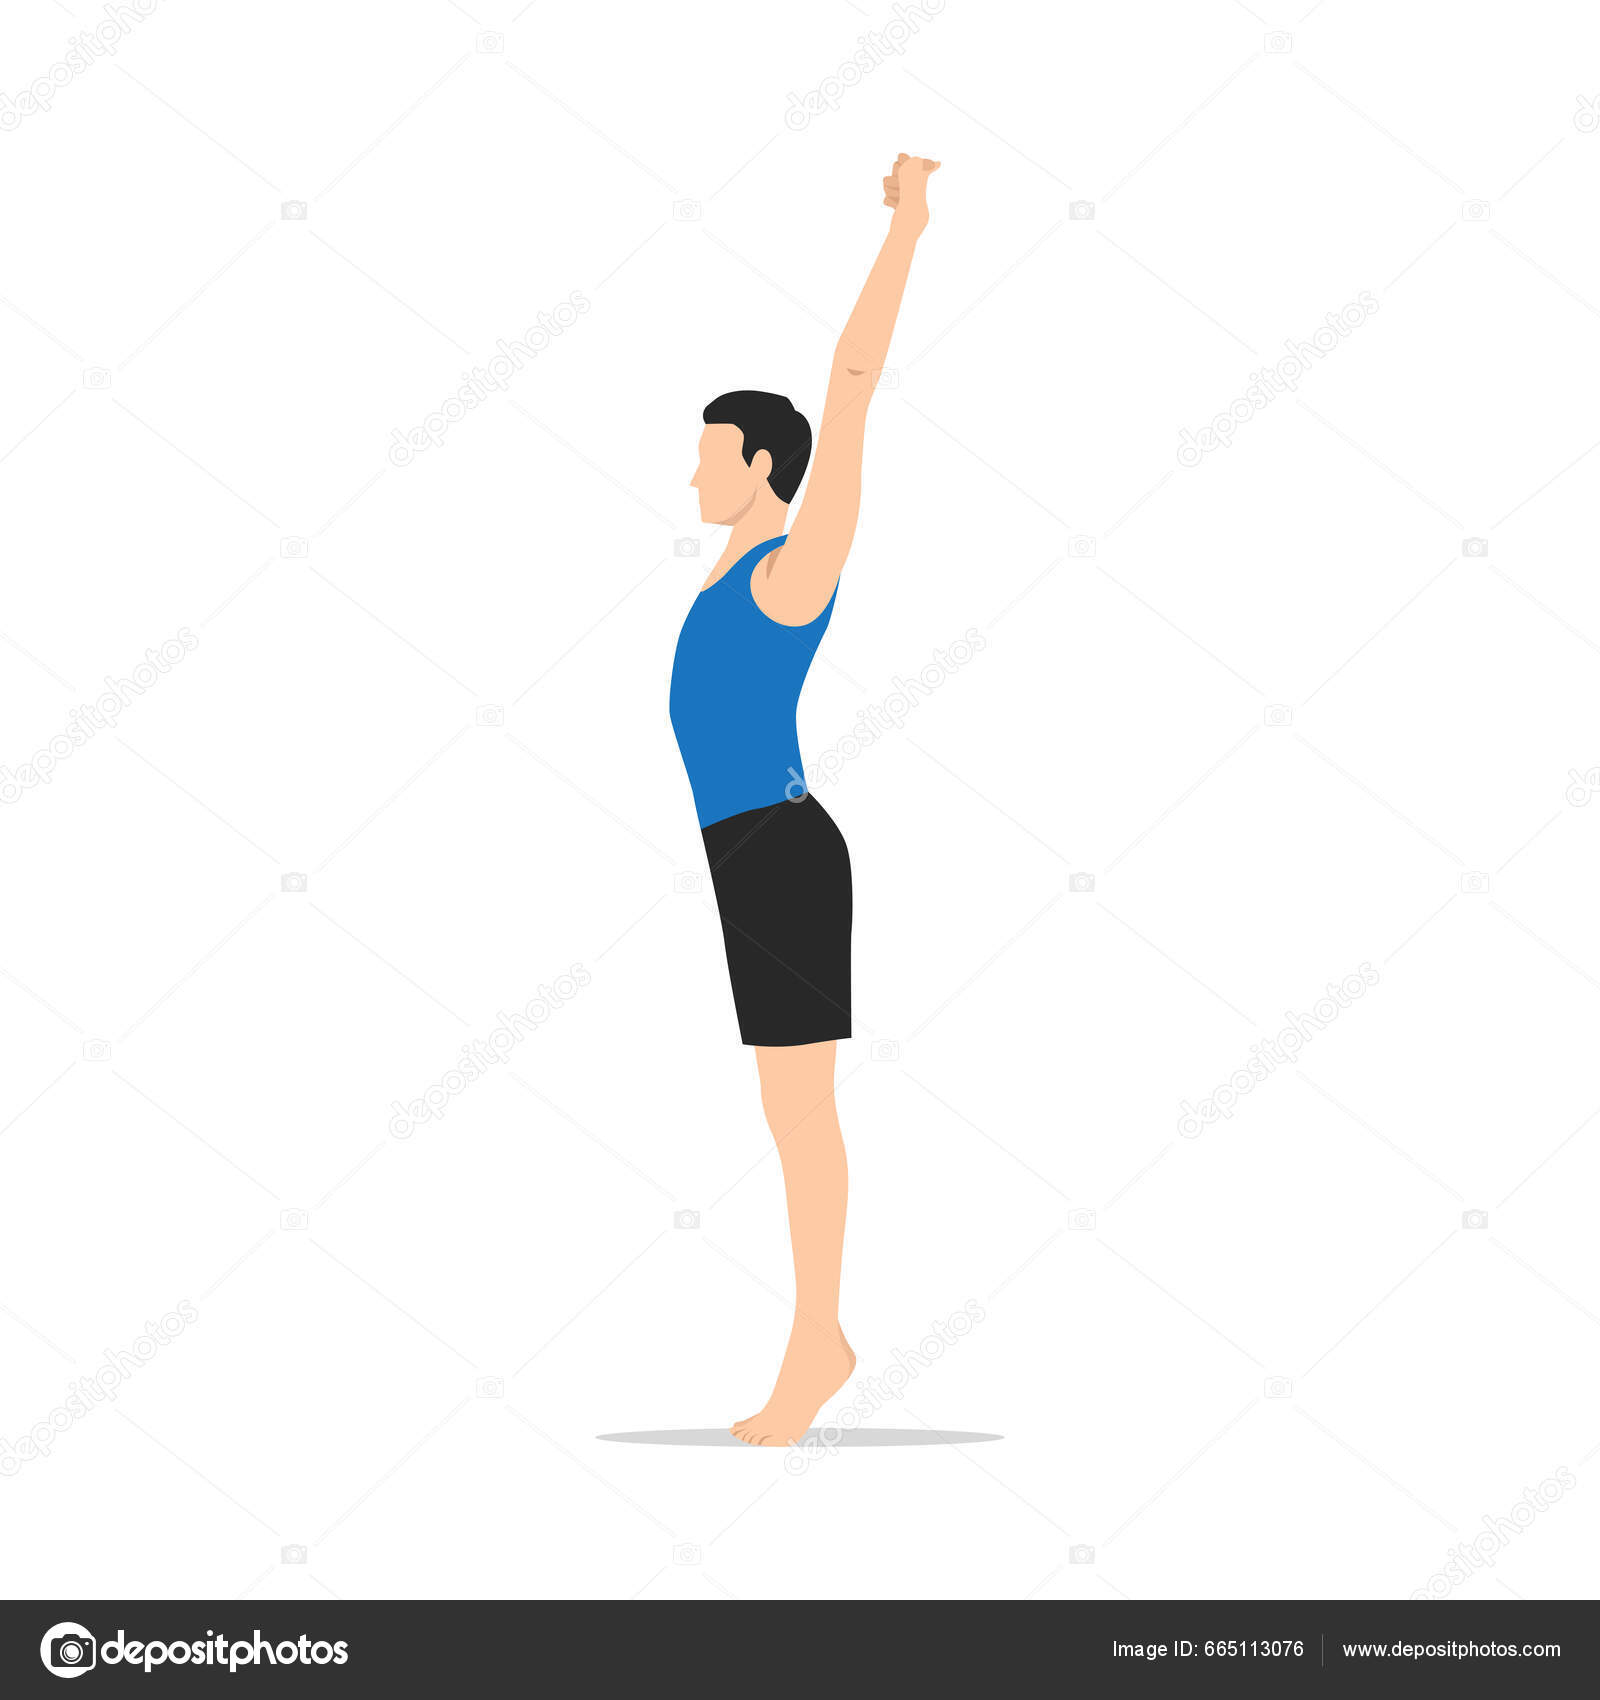 The work we have to do with the body in Urdhva Hastasana is almost the same  as in Tadasana, so the previous posts … | Learn yoga poses, Thigh muscles,  Yoga training